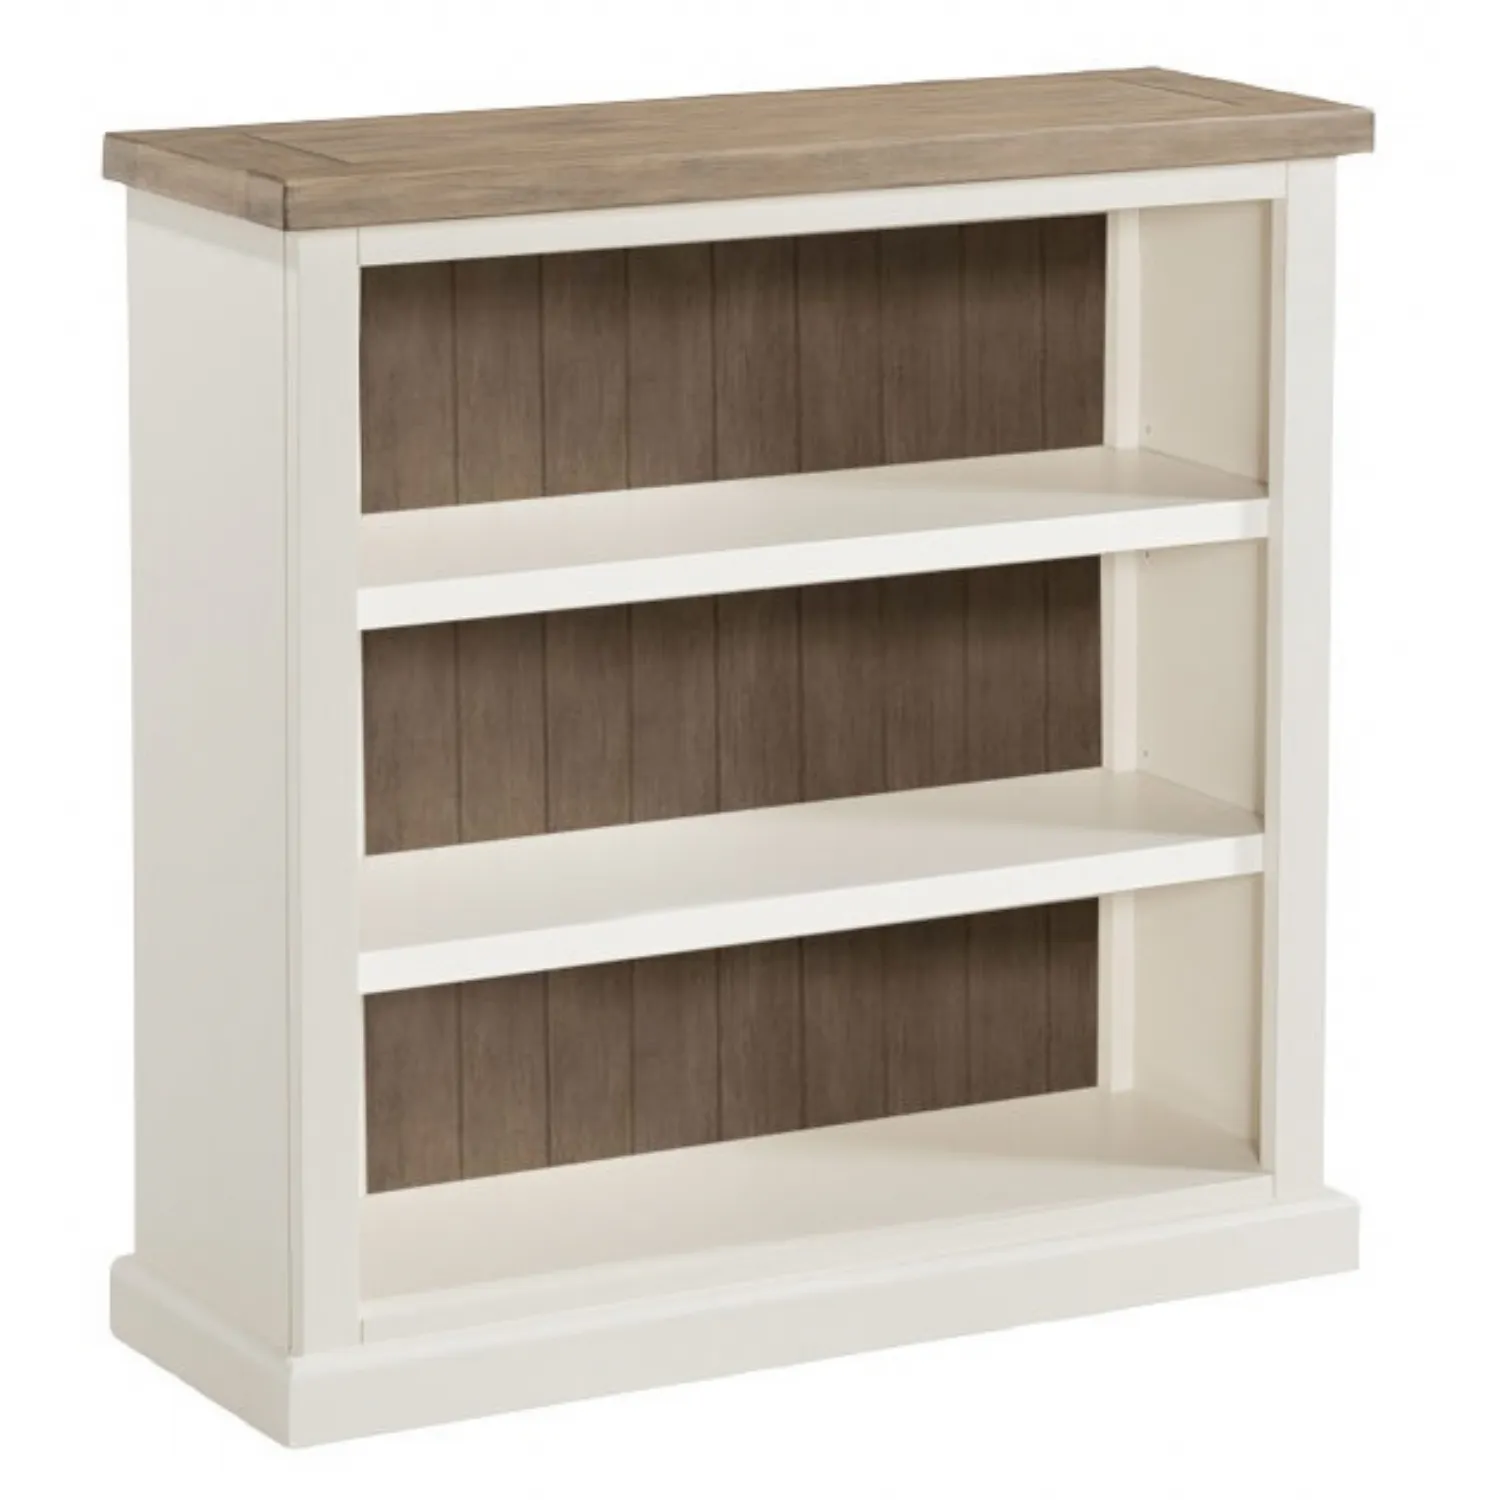 Stone Painted Pine Low Bookcase